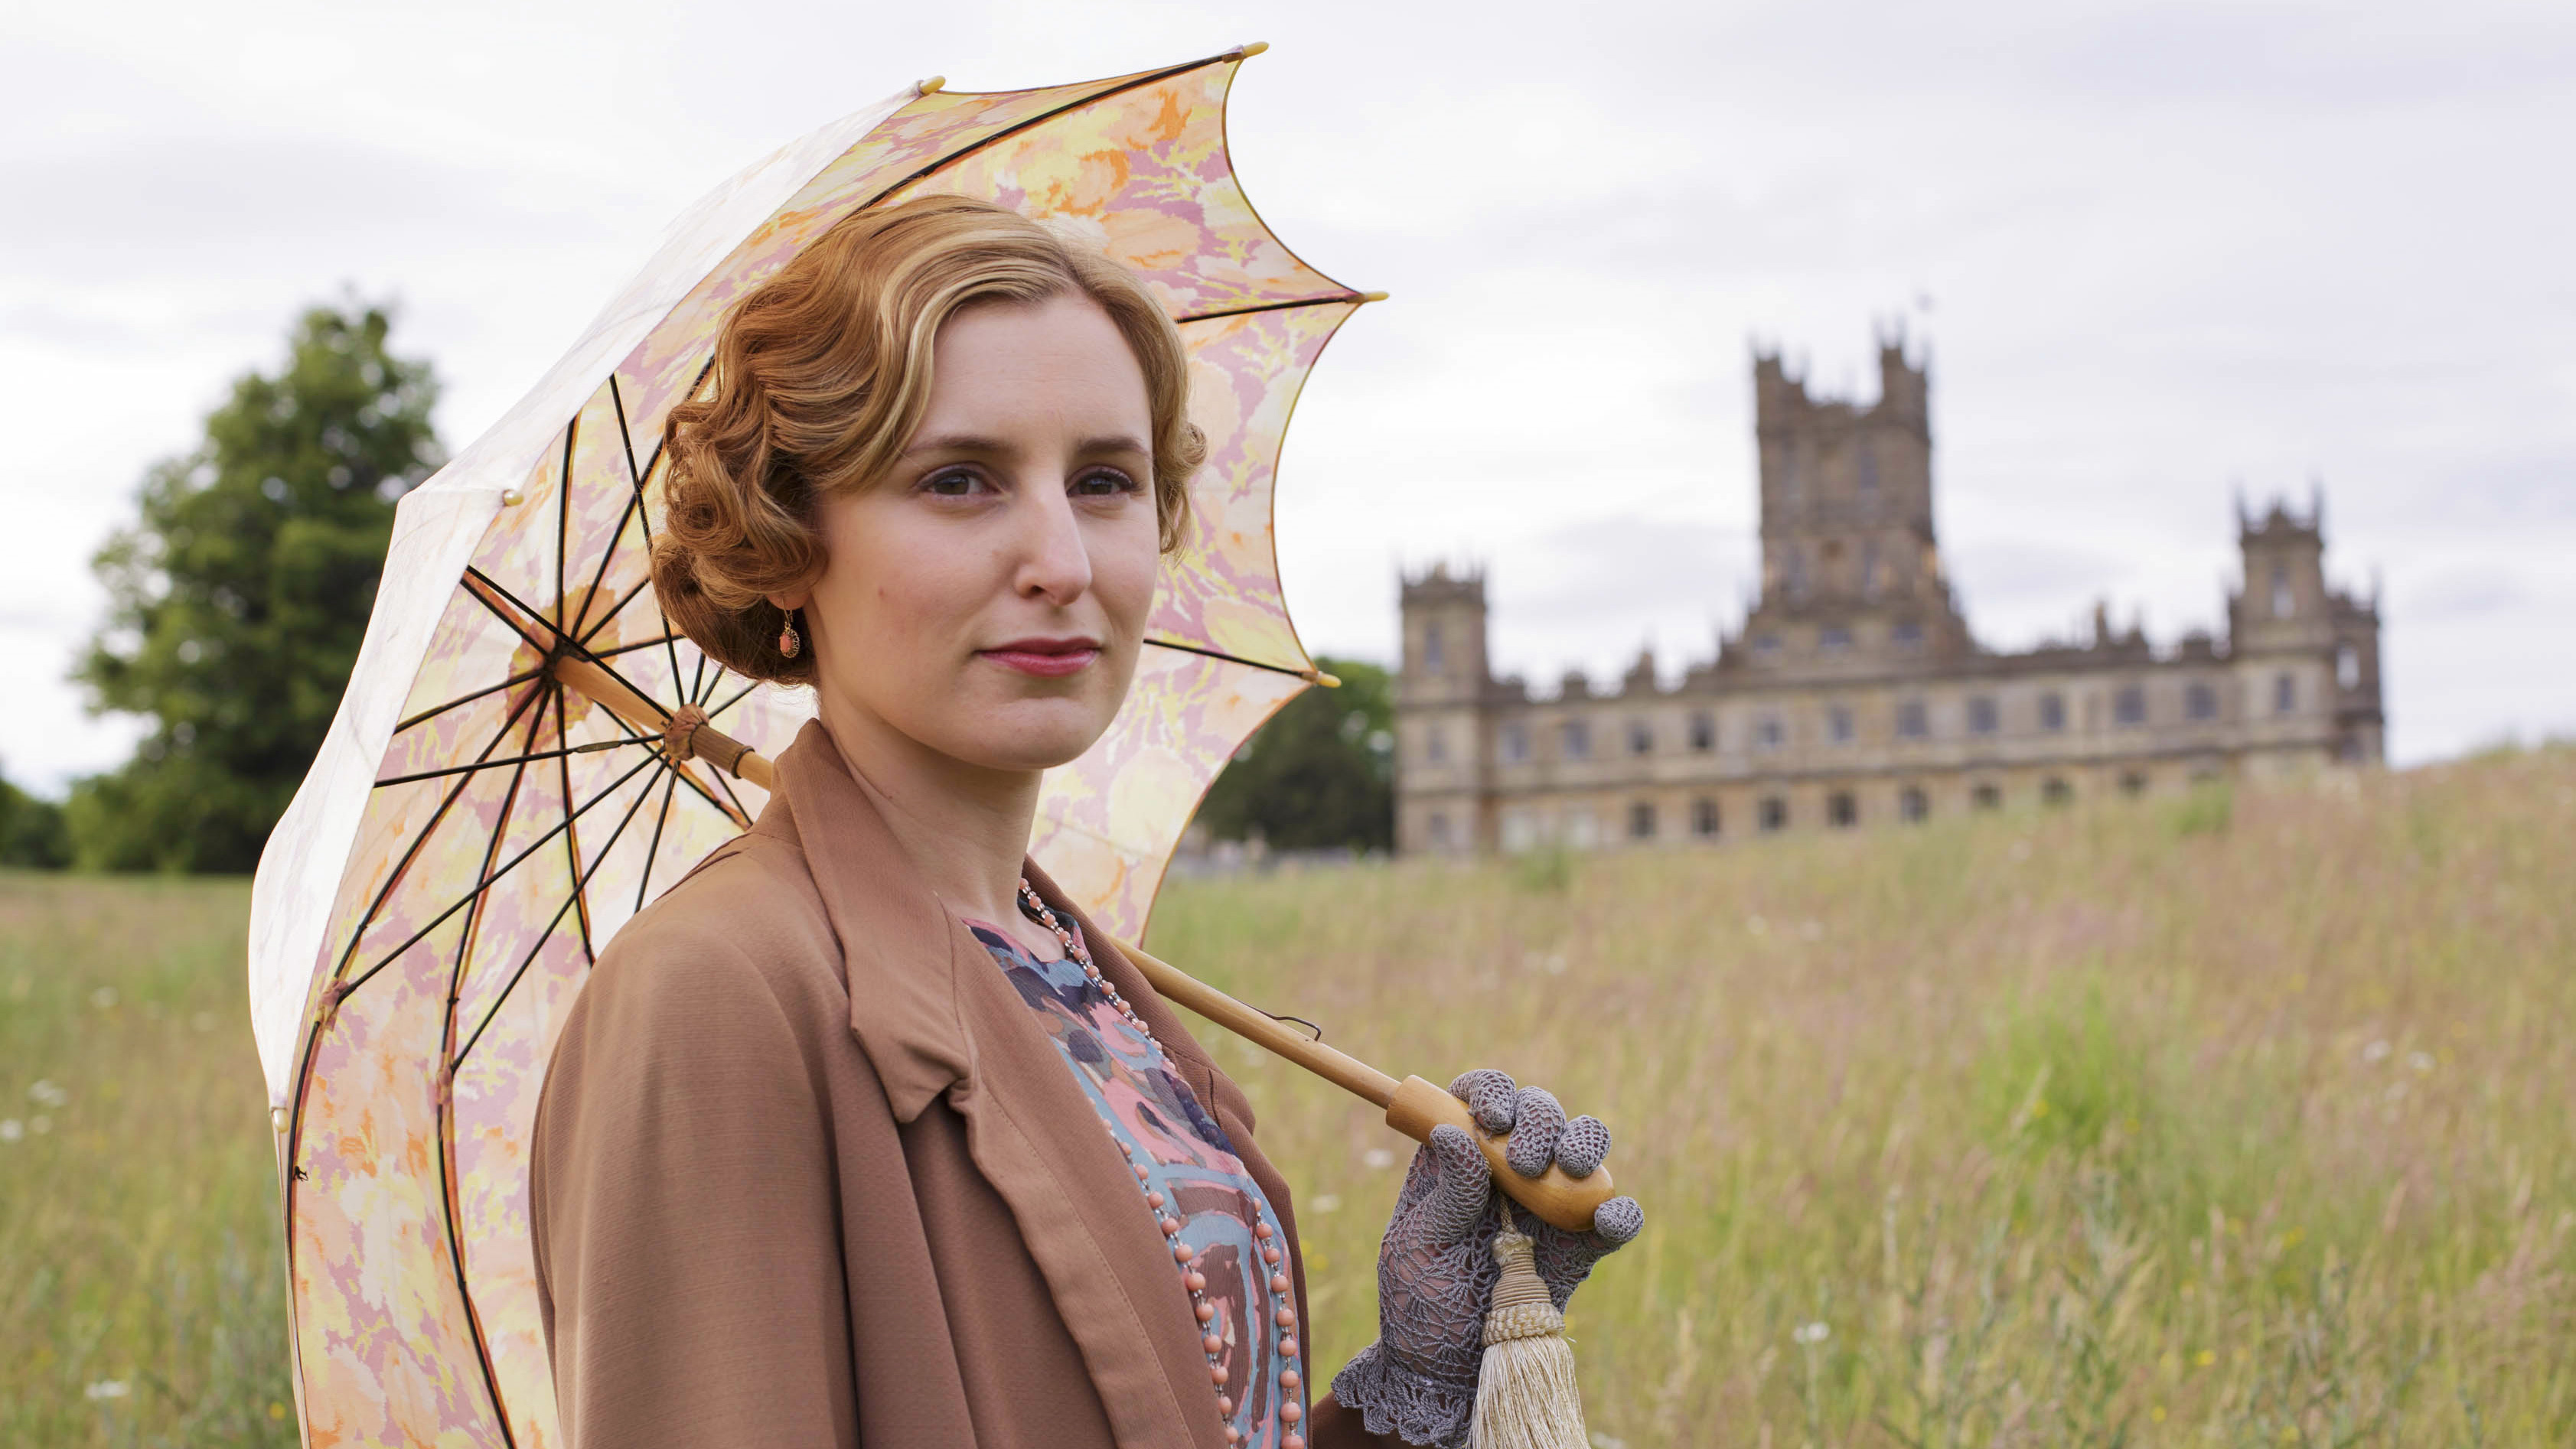 TV Show Downton Abbey HD Wallpaper | Background Image